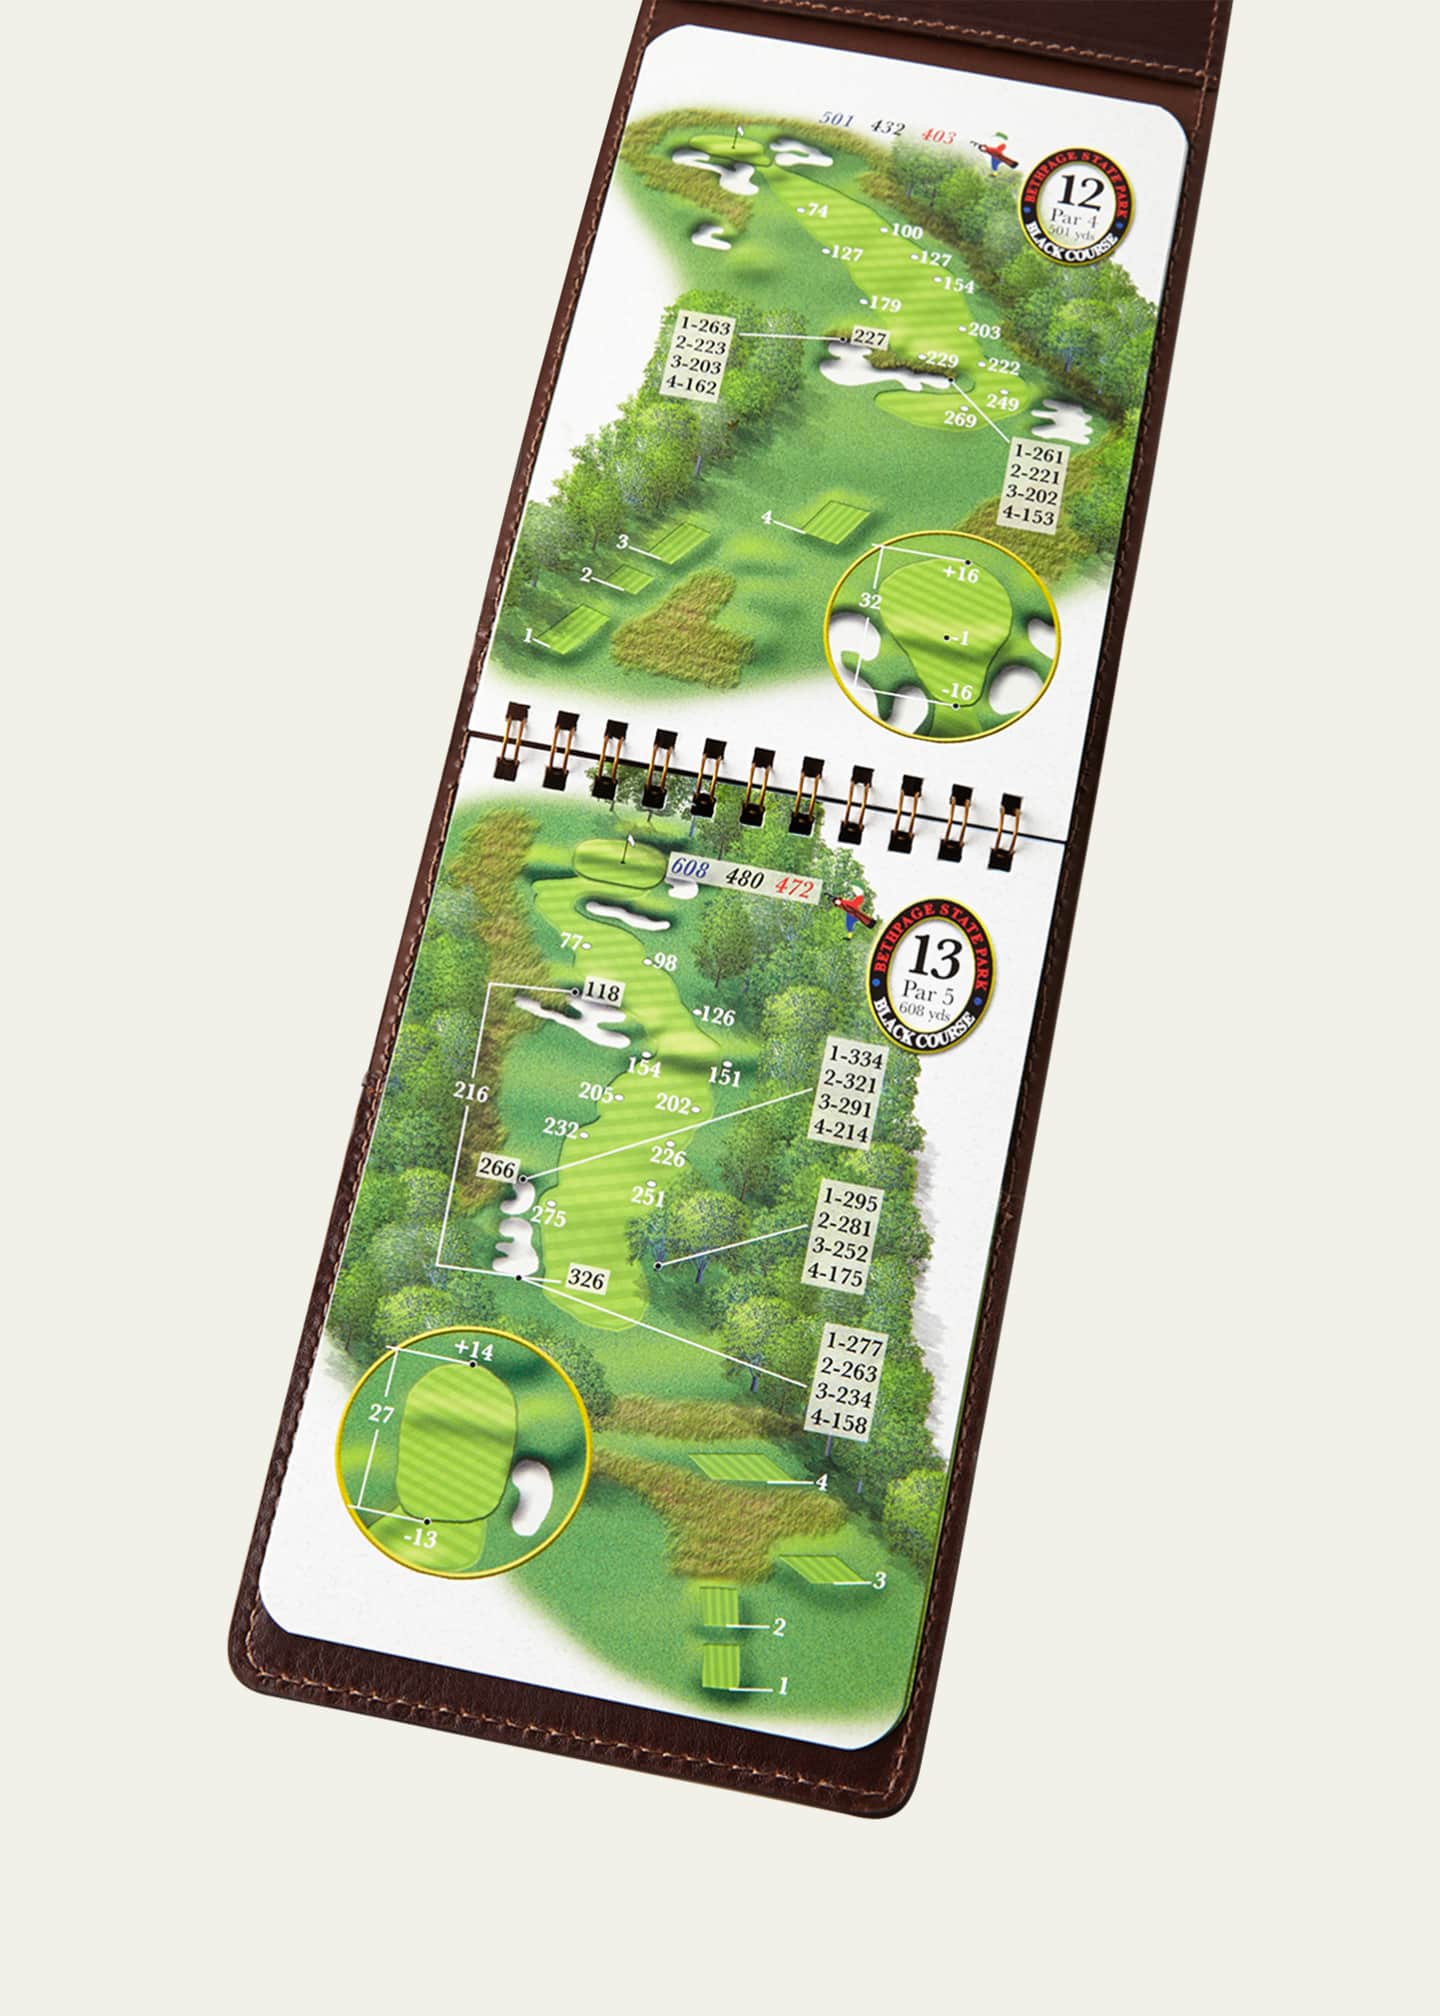 Graphic Image Personalized Golf Yardage Book Cover Image 3 of 3